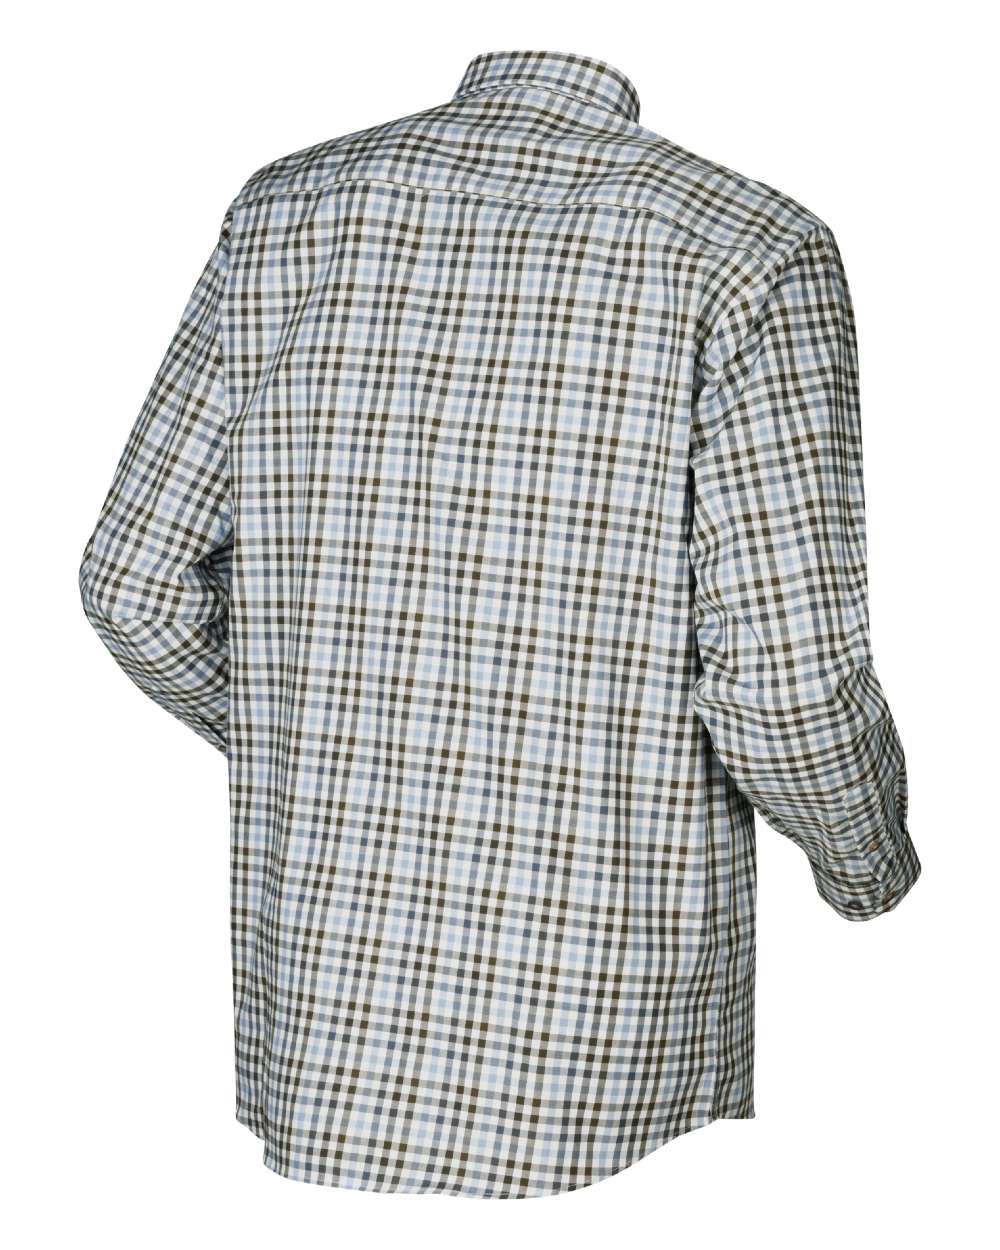 Harkila Milford Shirt in Heritage Blue Check 